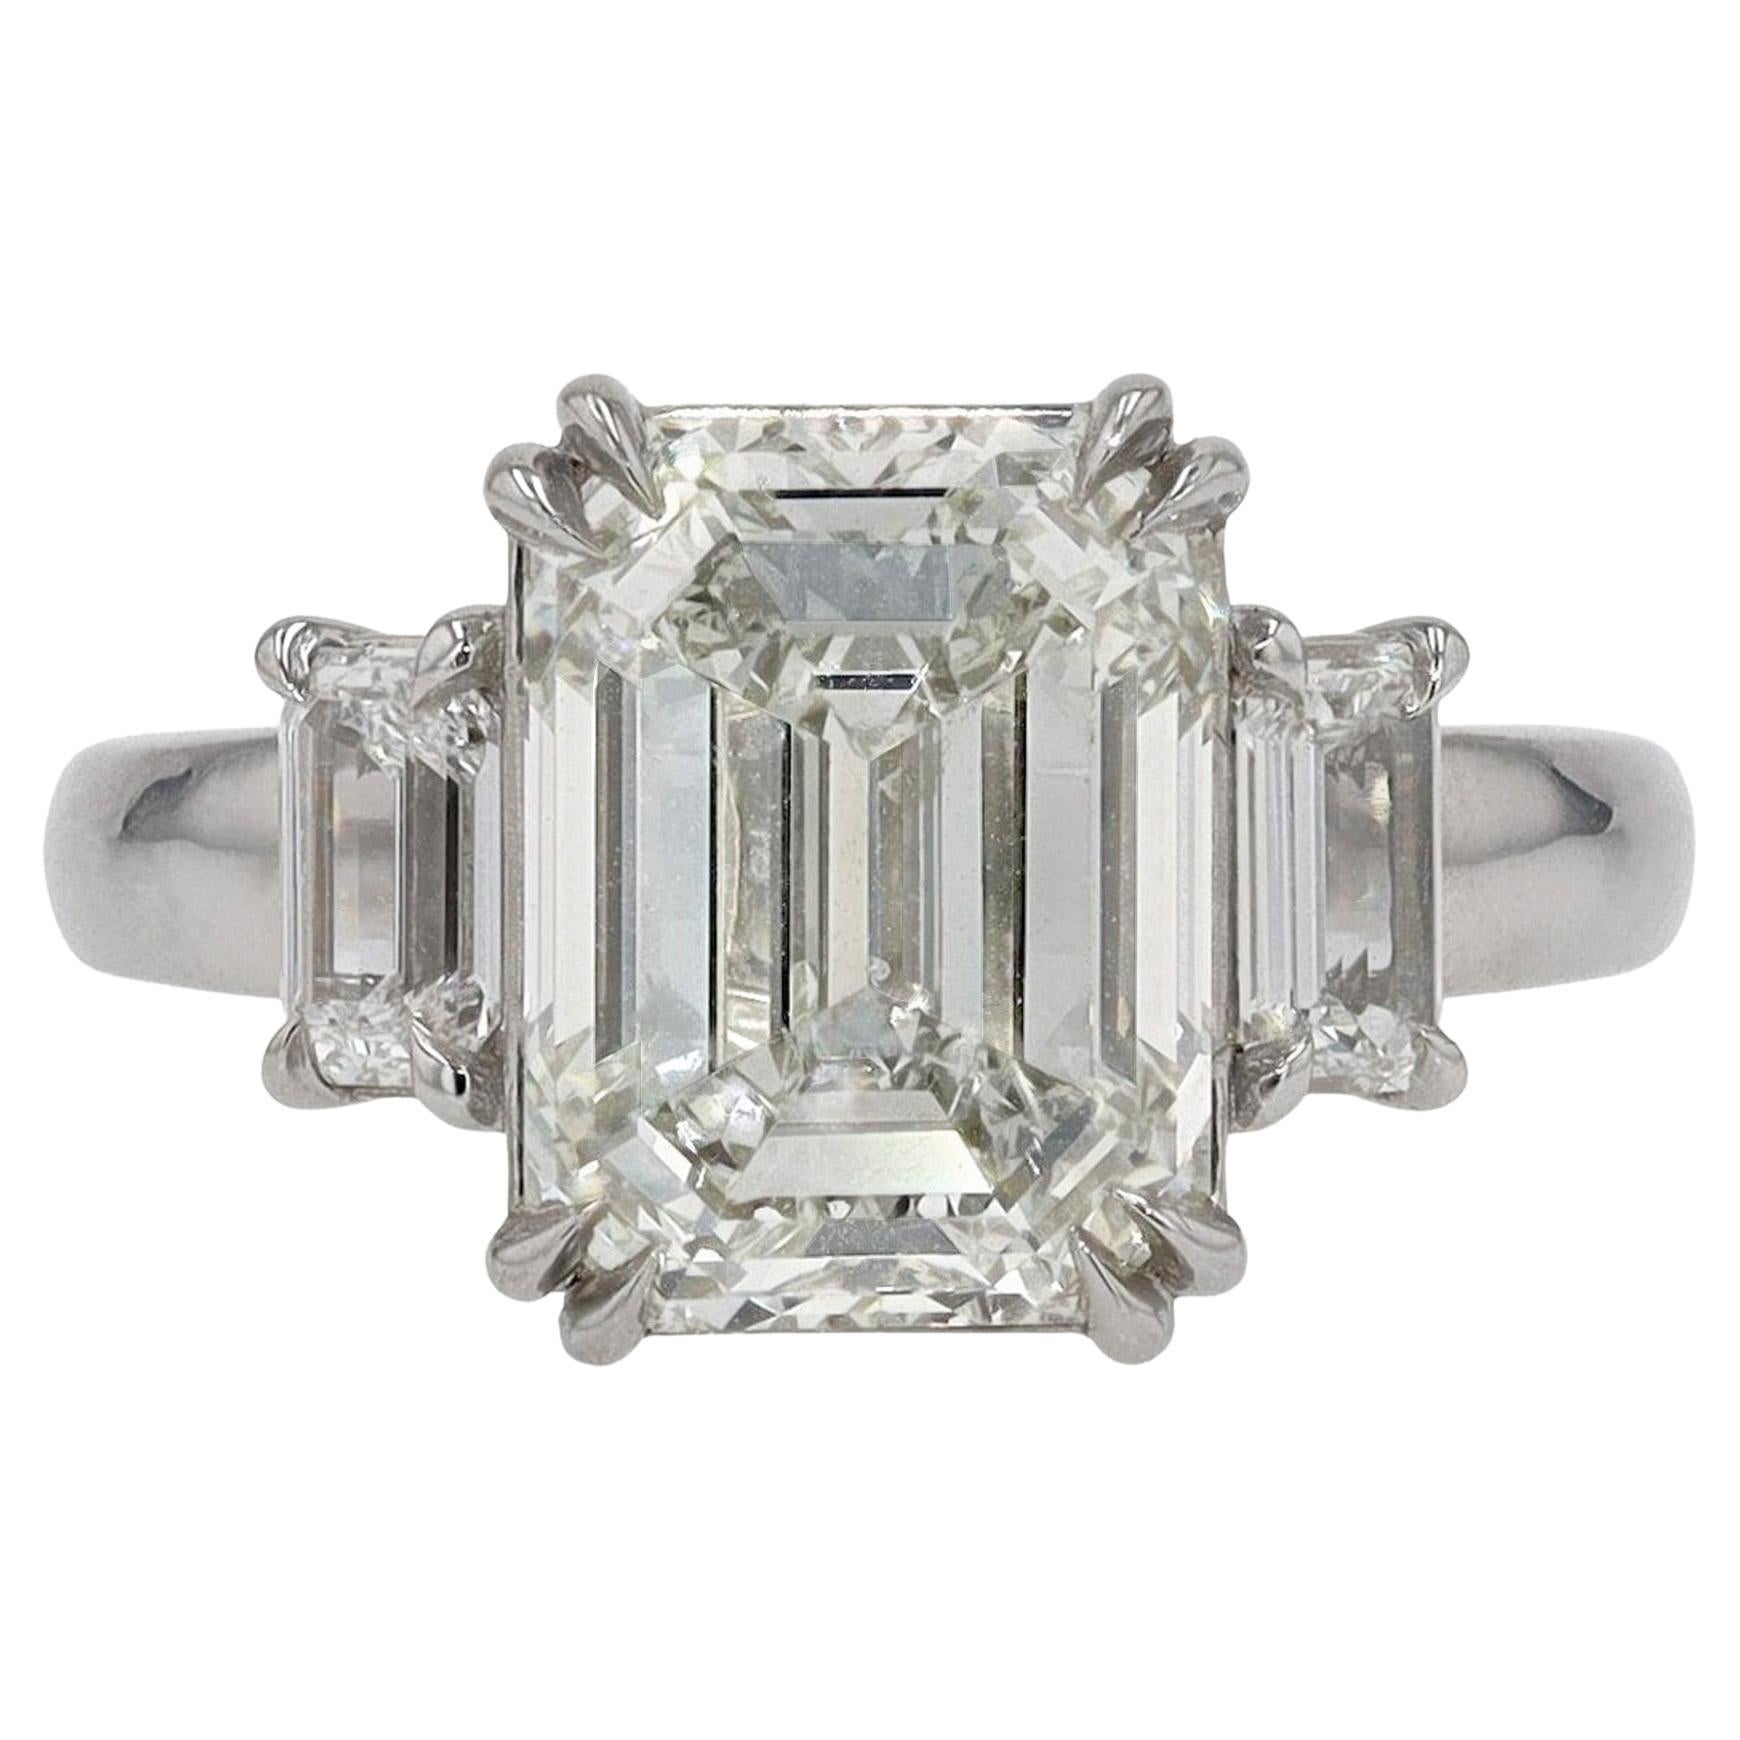 GIA Certified 5.01 Carat Emerald Cut Diamond Engagement Ring For Sale